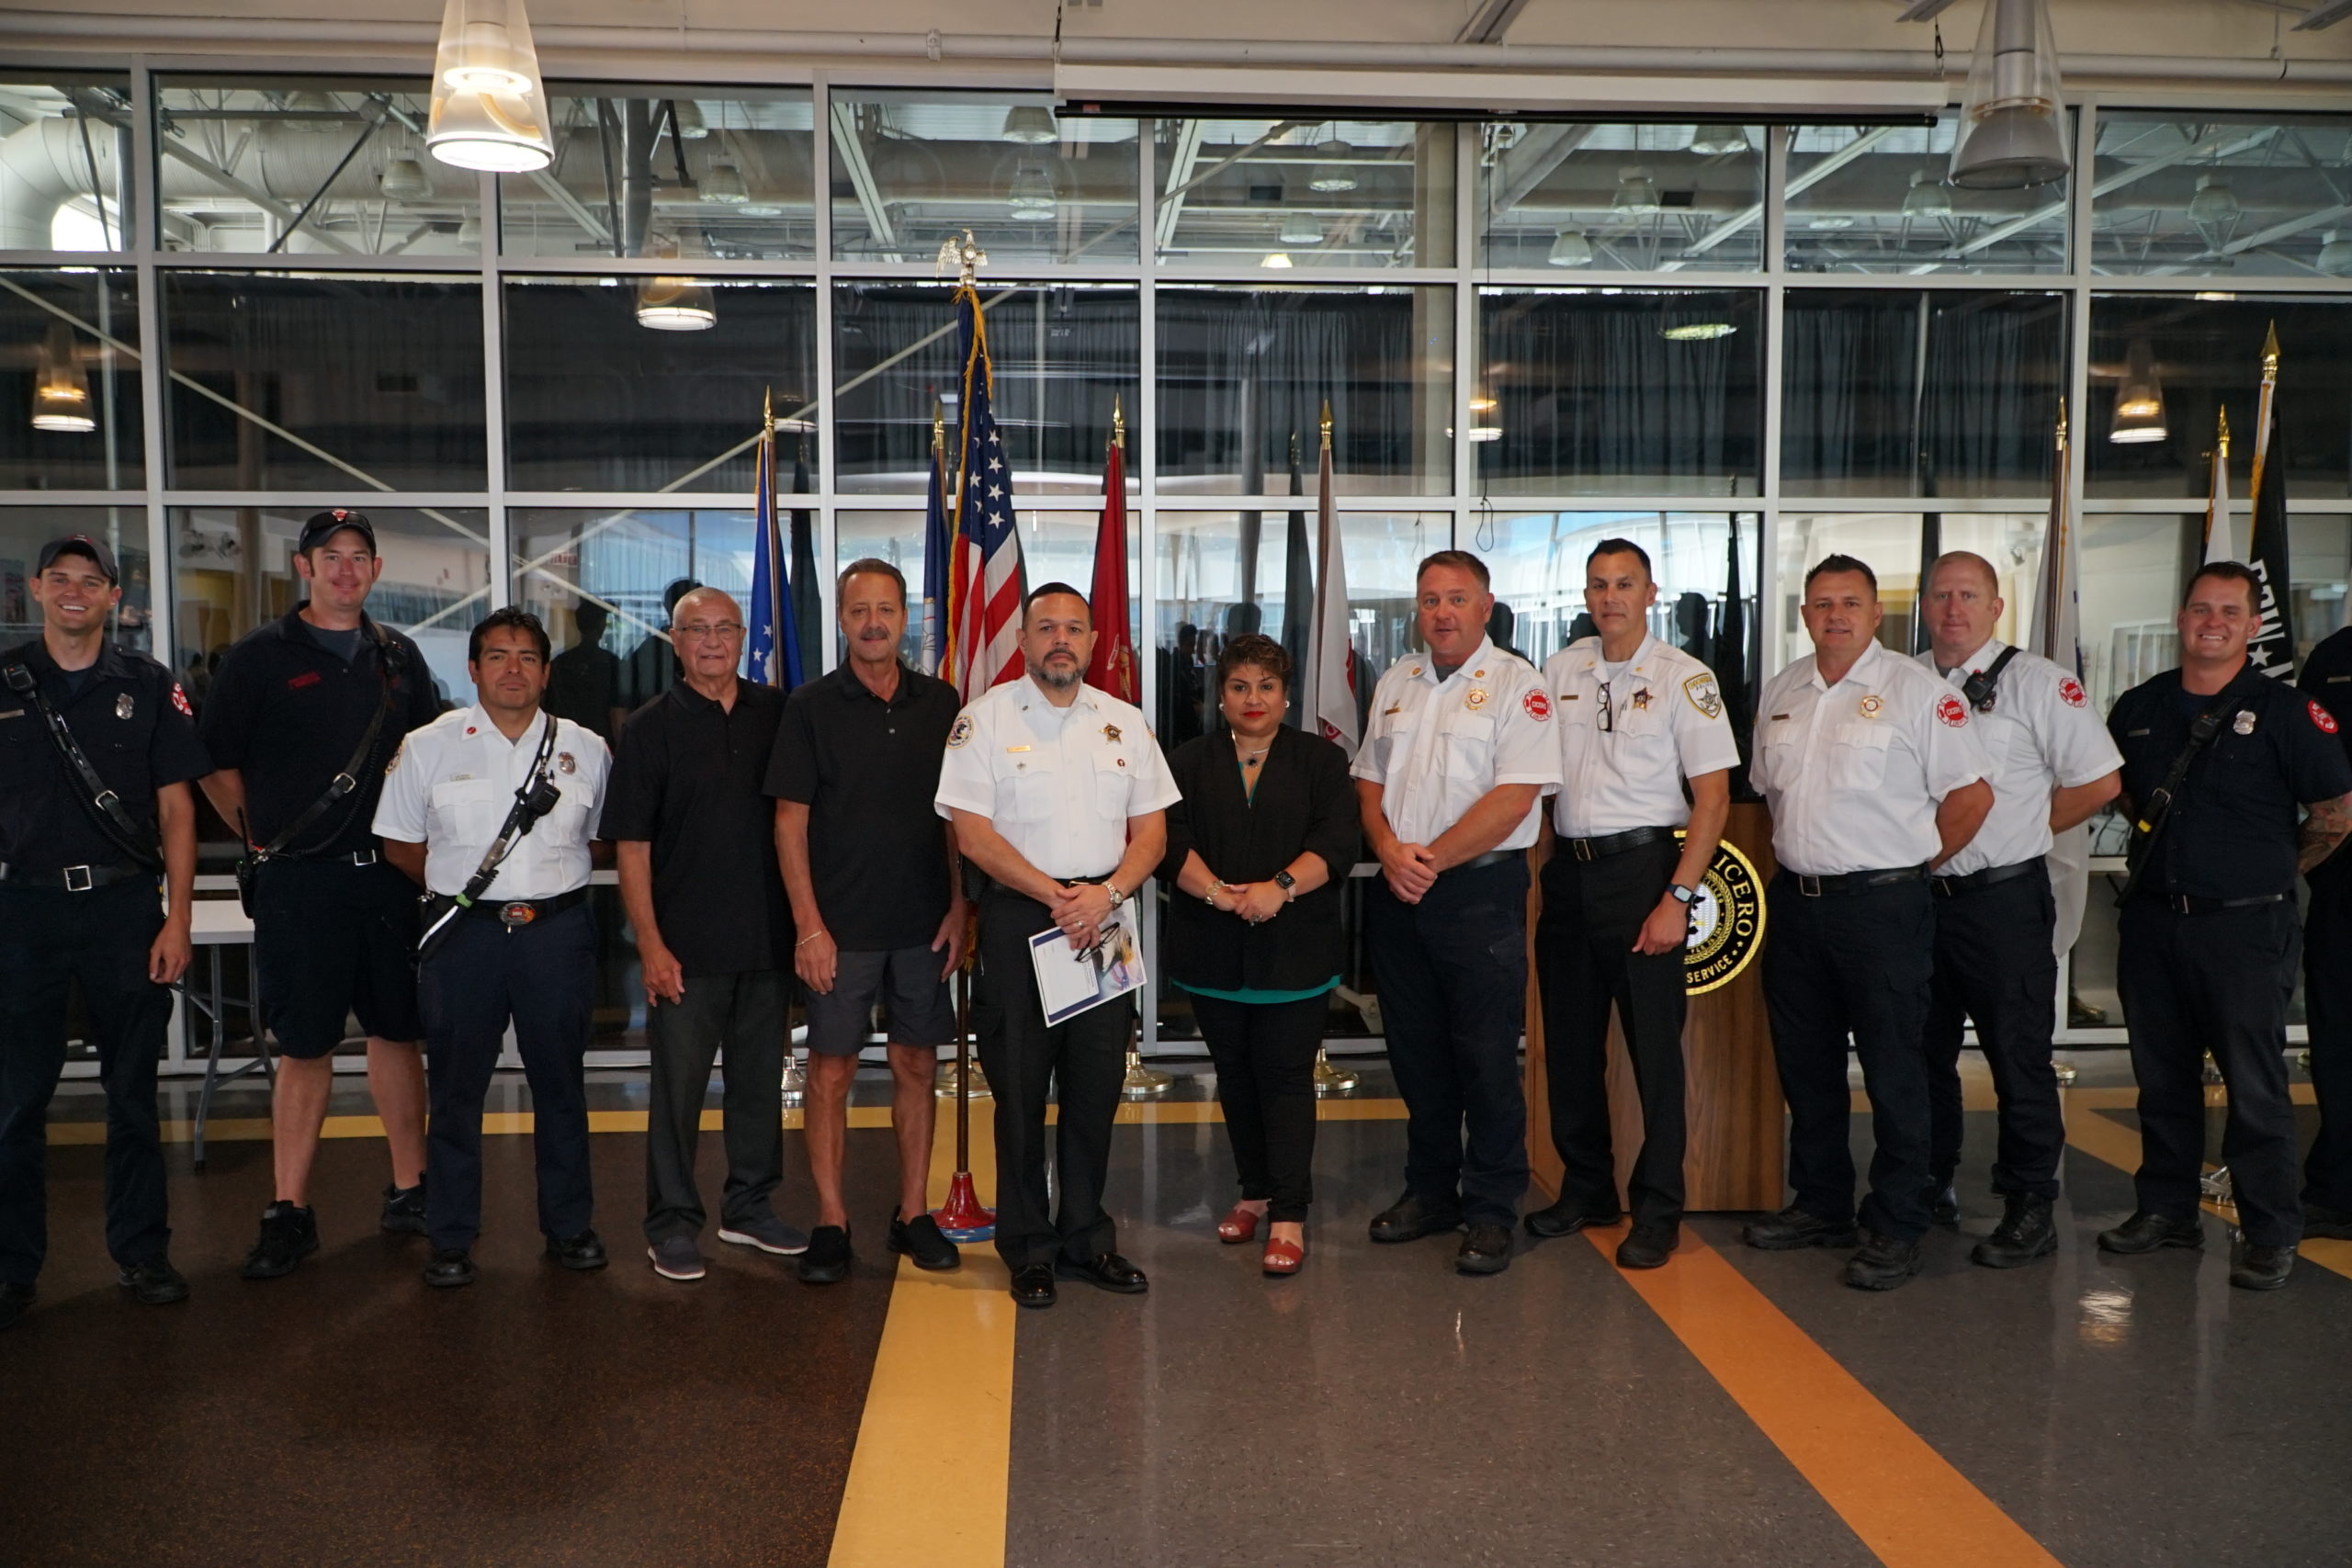 Officials and speakers gather following the Town of CIcero’s ceremony on Sept. 8, 2022 commemorating the 21st anniversary of the Sept. 11, 2001 terrorist attacks.